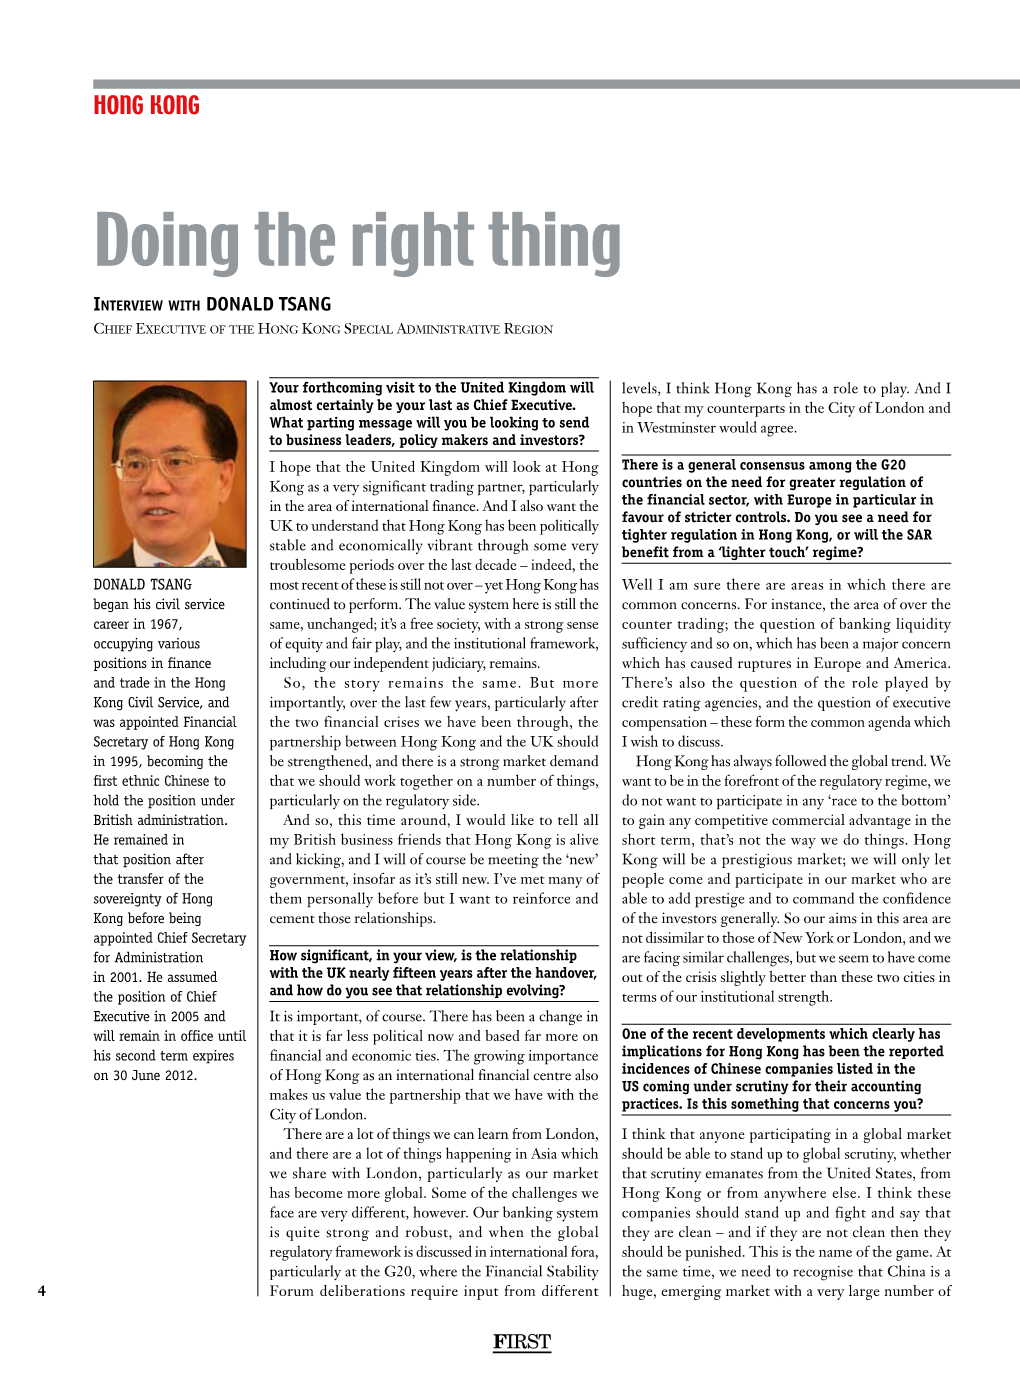 Doing the Right Thing Interview with Donald Tsang Chief Executive of the Hong Kong Special Administrative Region